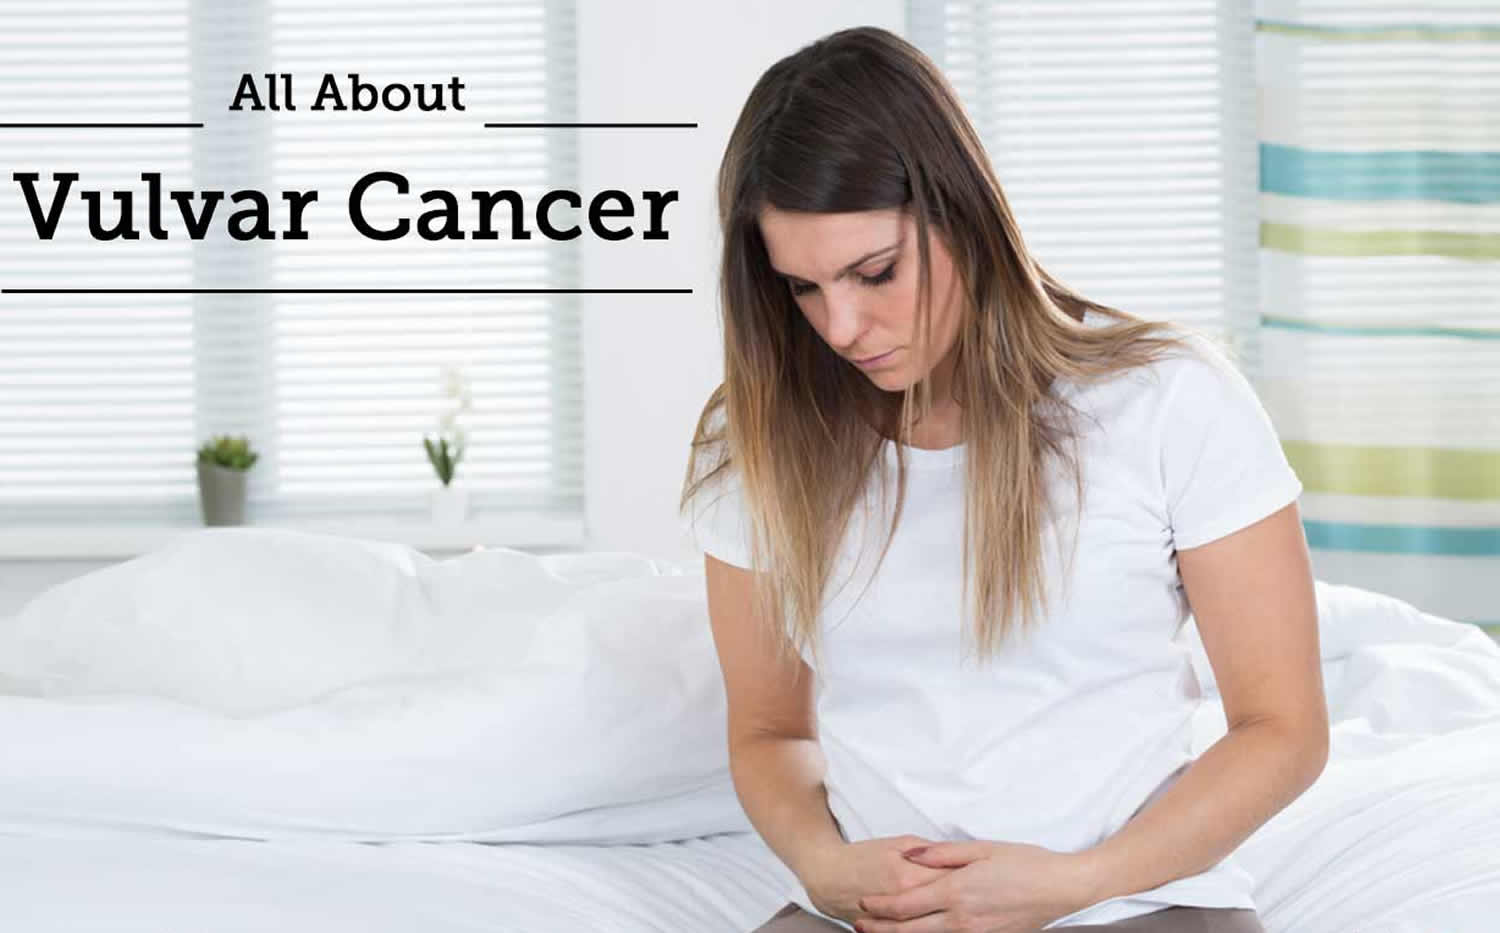 Vulvar Cancer Causes Symptoms Staging Prevention And Treatment